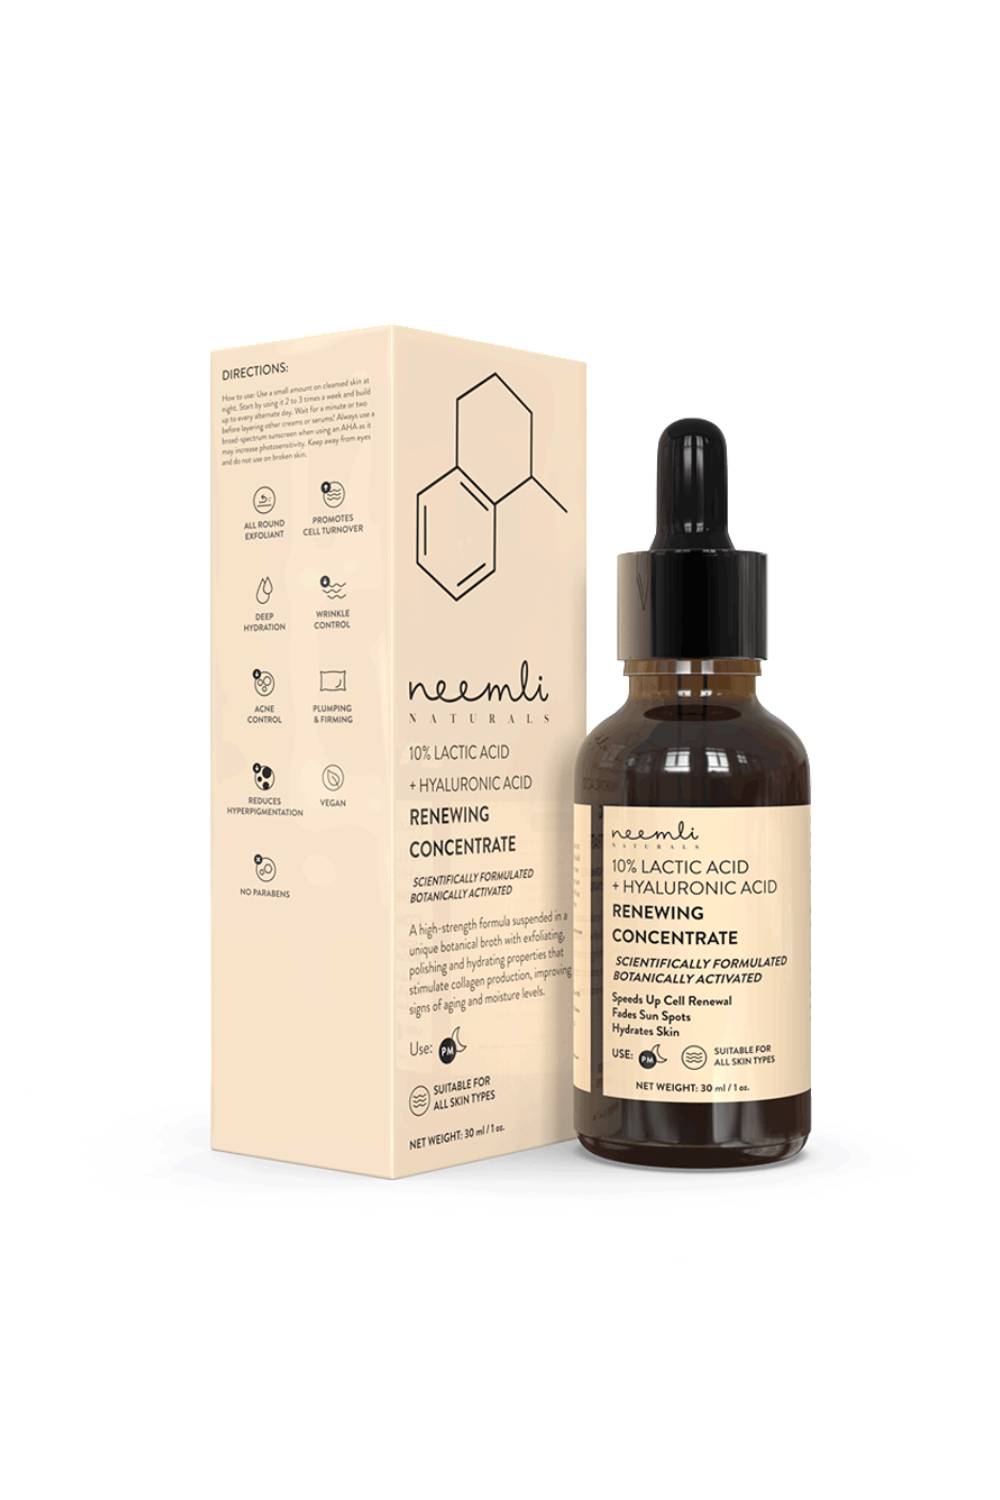 10% Lactic Acid + Hyaluronic Acid Renewing Concentrate-30ml